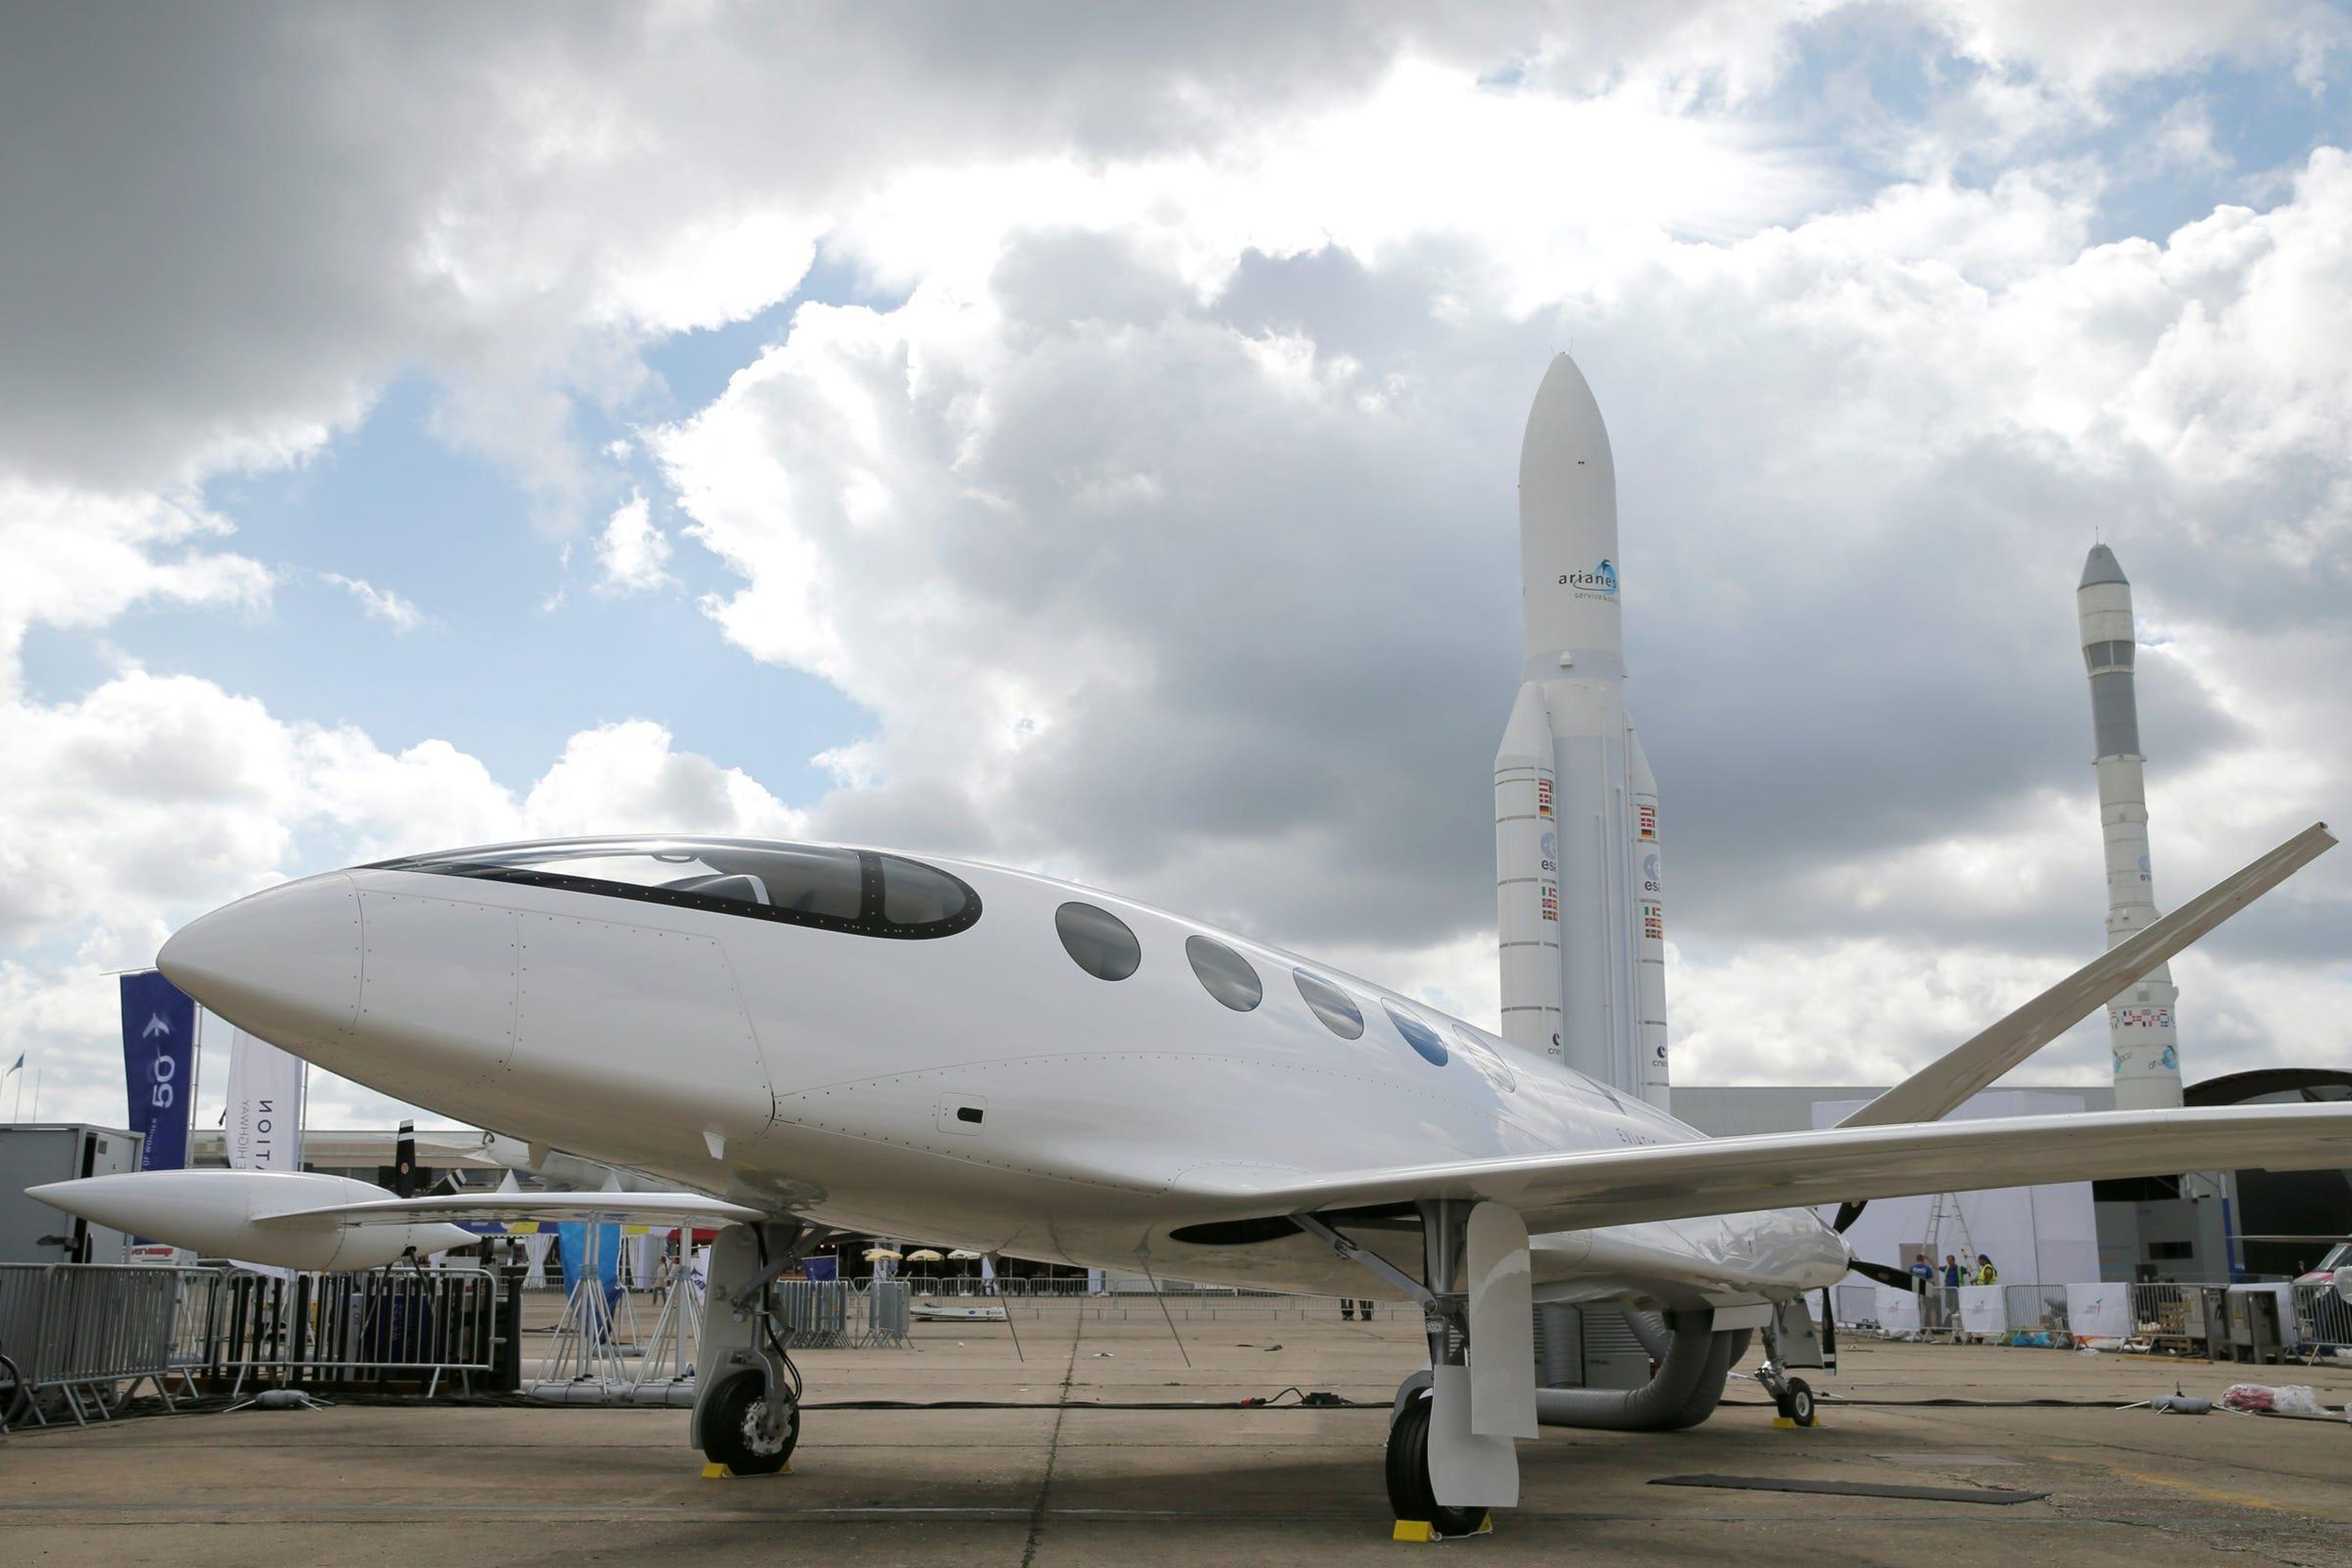 Israeli Eviation Alice electric aircraft is seen on static display, at the eve of the opening of the 53rd International Paris Air Show at Le Bourget Airport near Paris, France, June 16 2019.